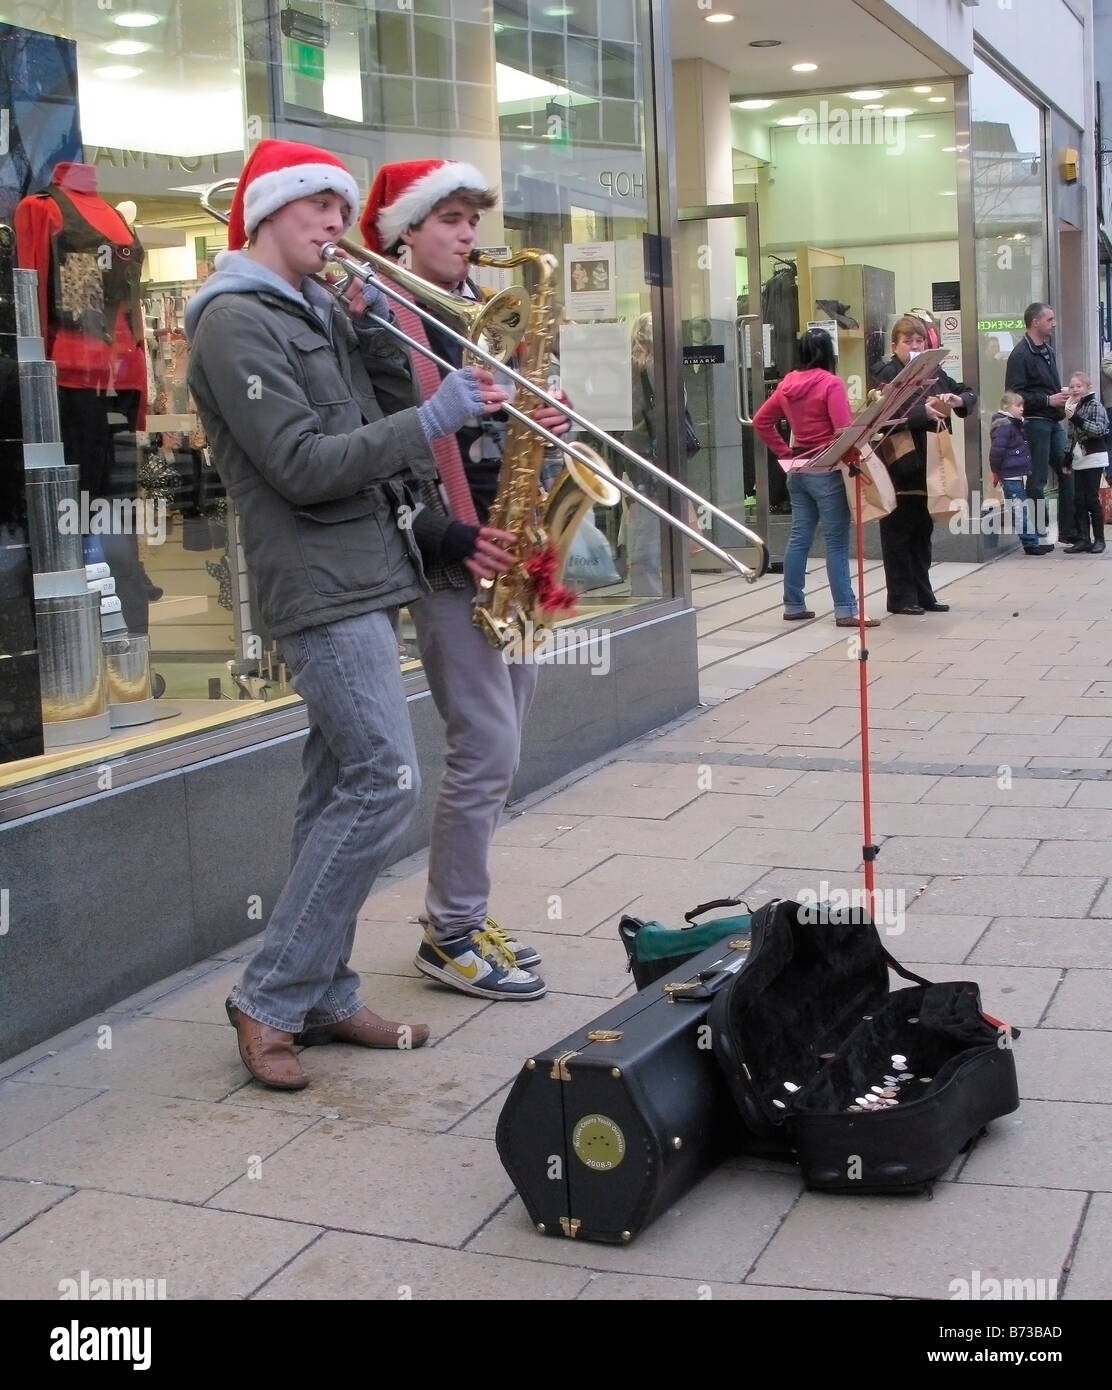 Two lads busking money by playing Christmas carols on trombones on the Street of Norwich during Christmas period Stock Photo